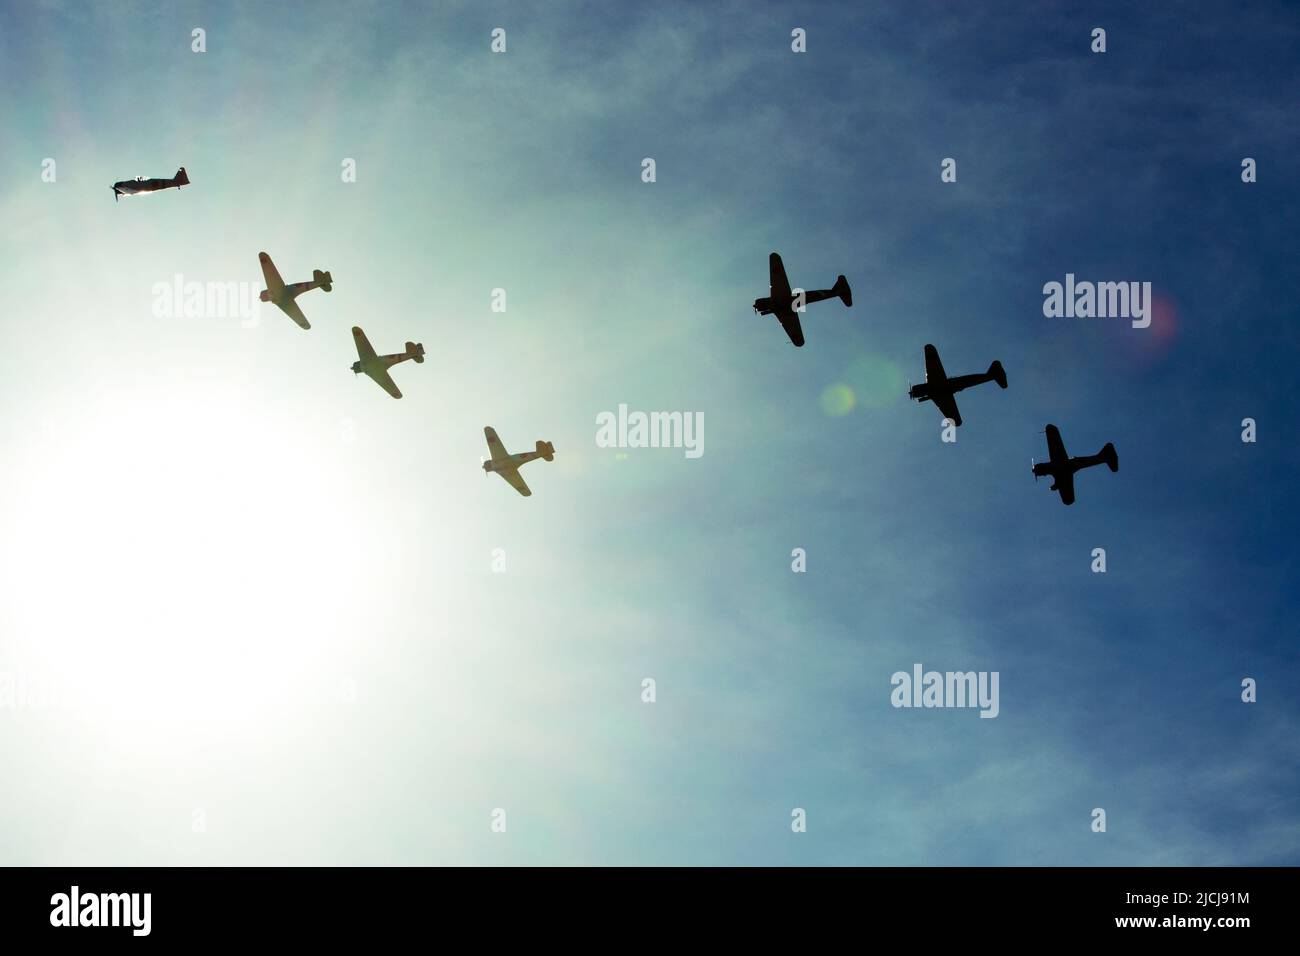 Flyover of vintage military aircraft. Stock Photo